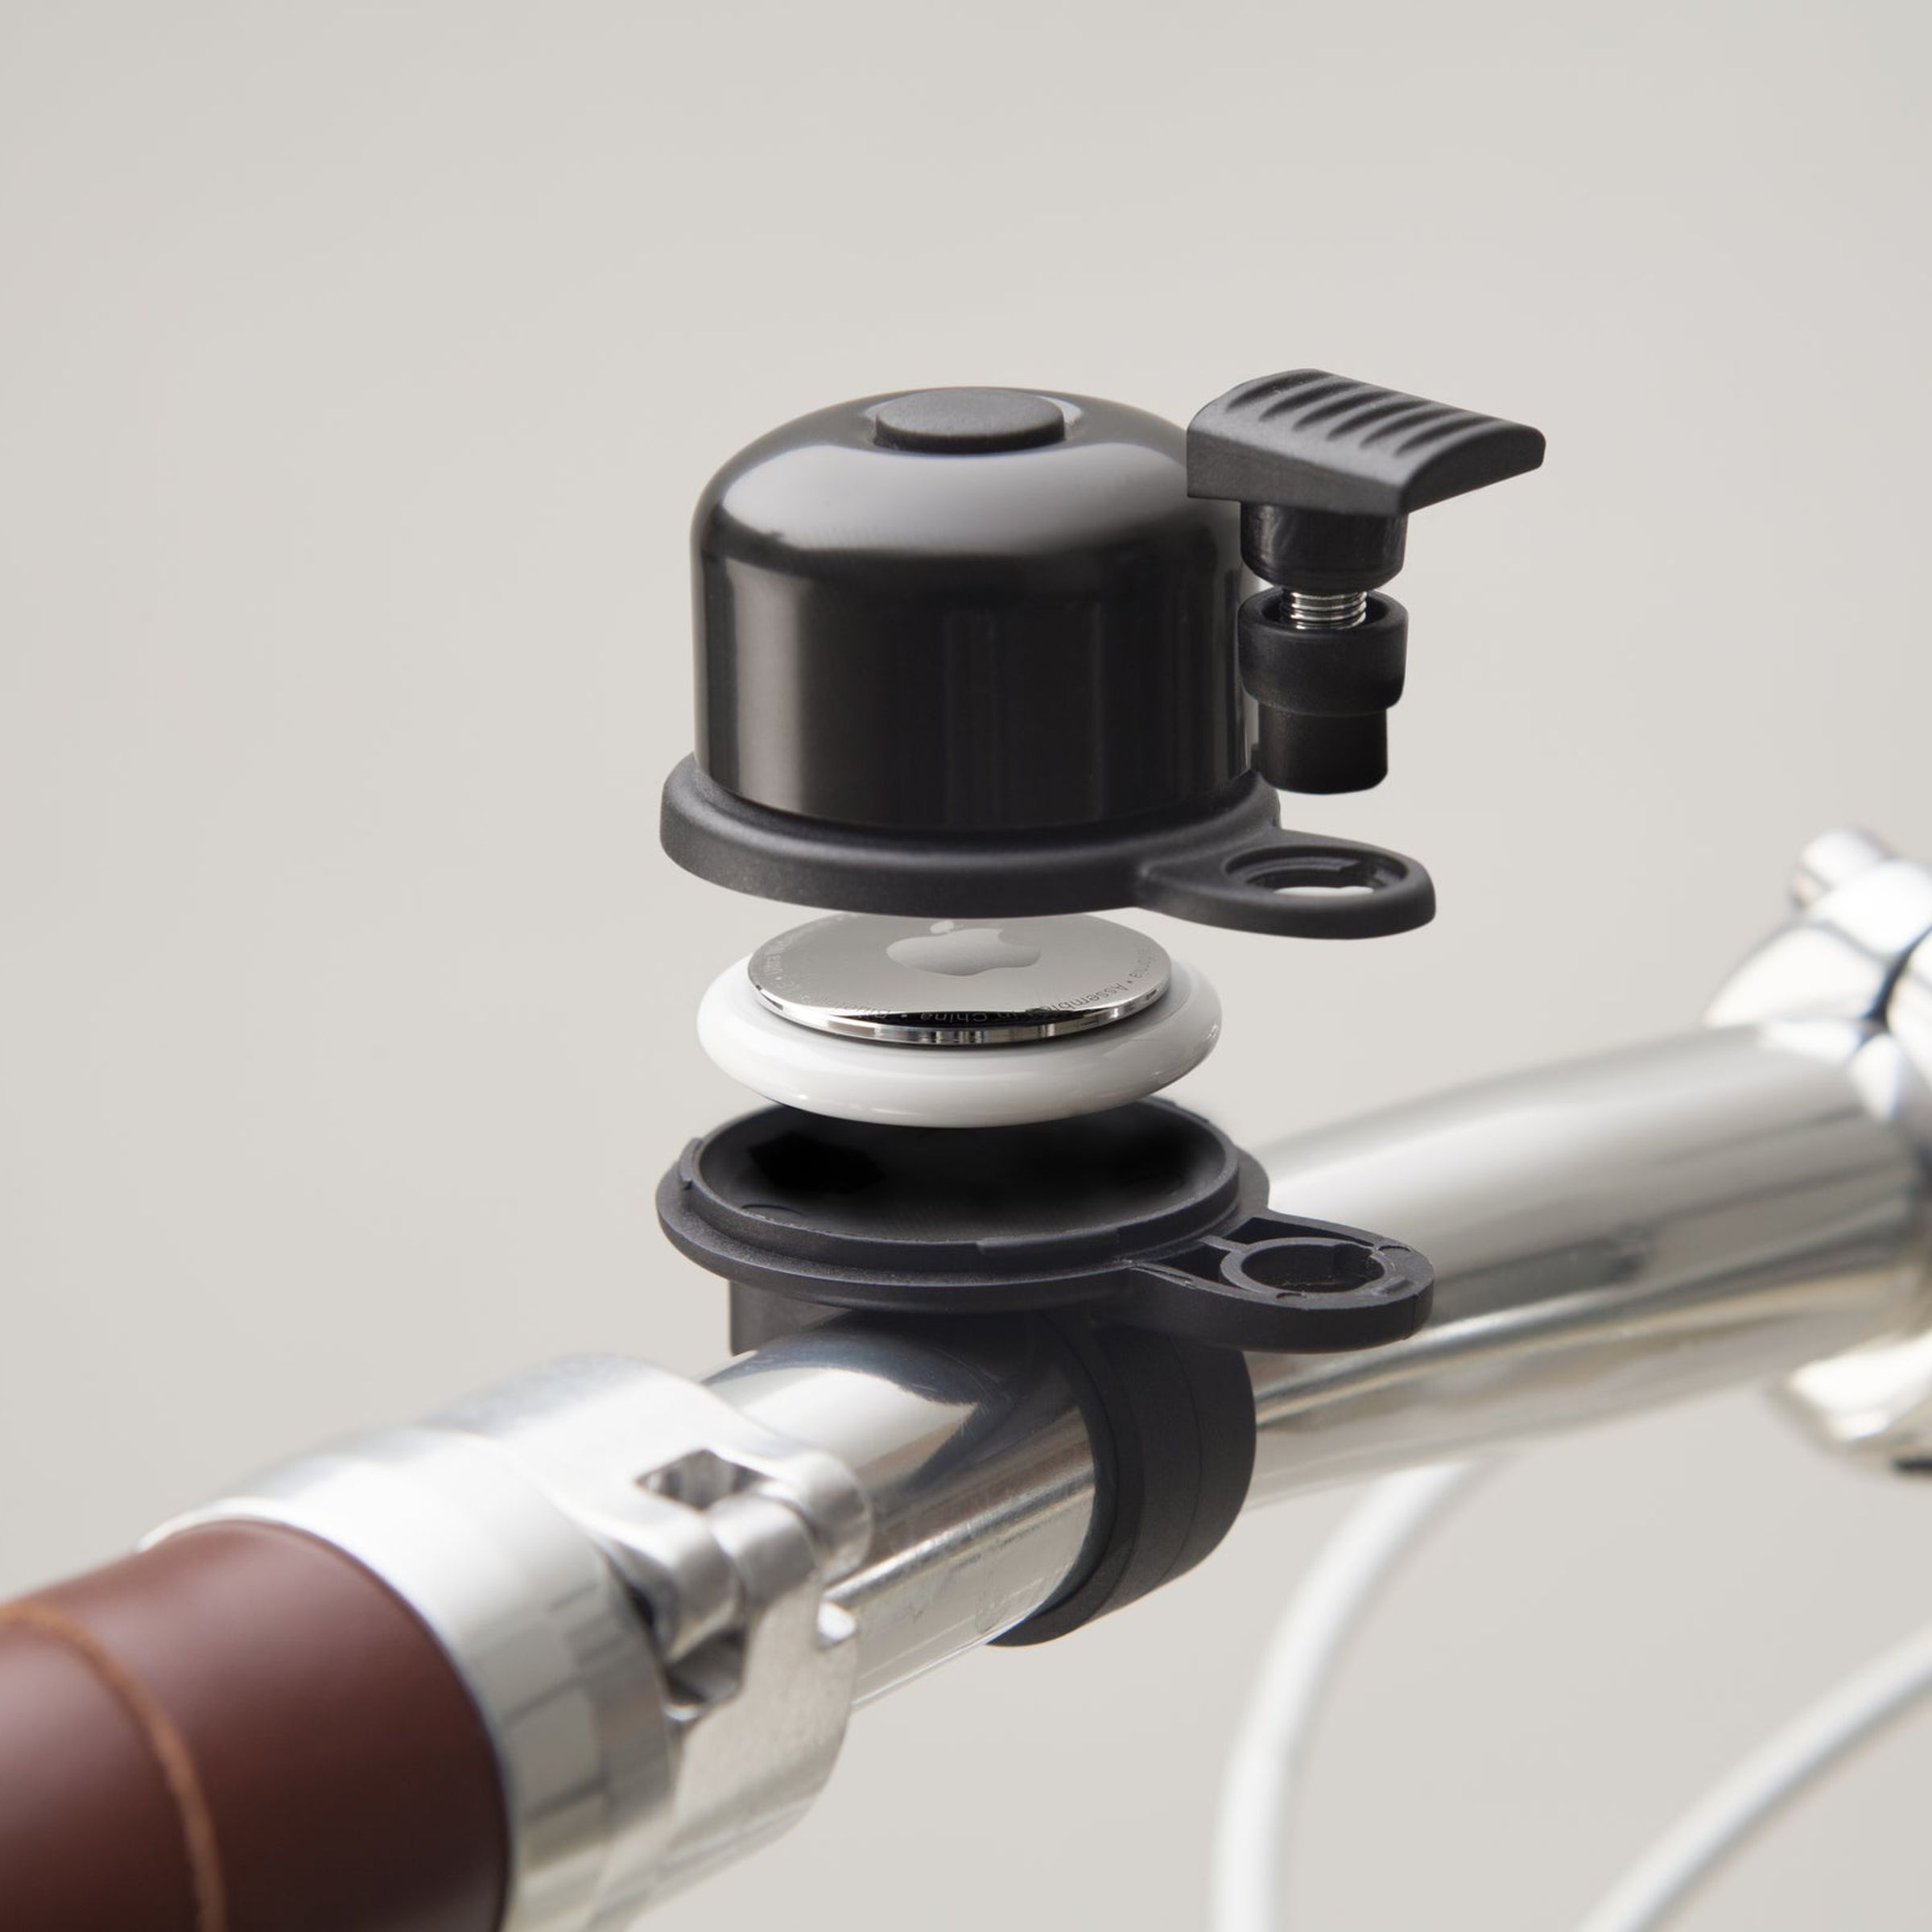 AirBell discreetly hides an Apple AirTag tracker to keep tabs on your bicycle.